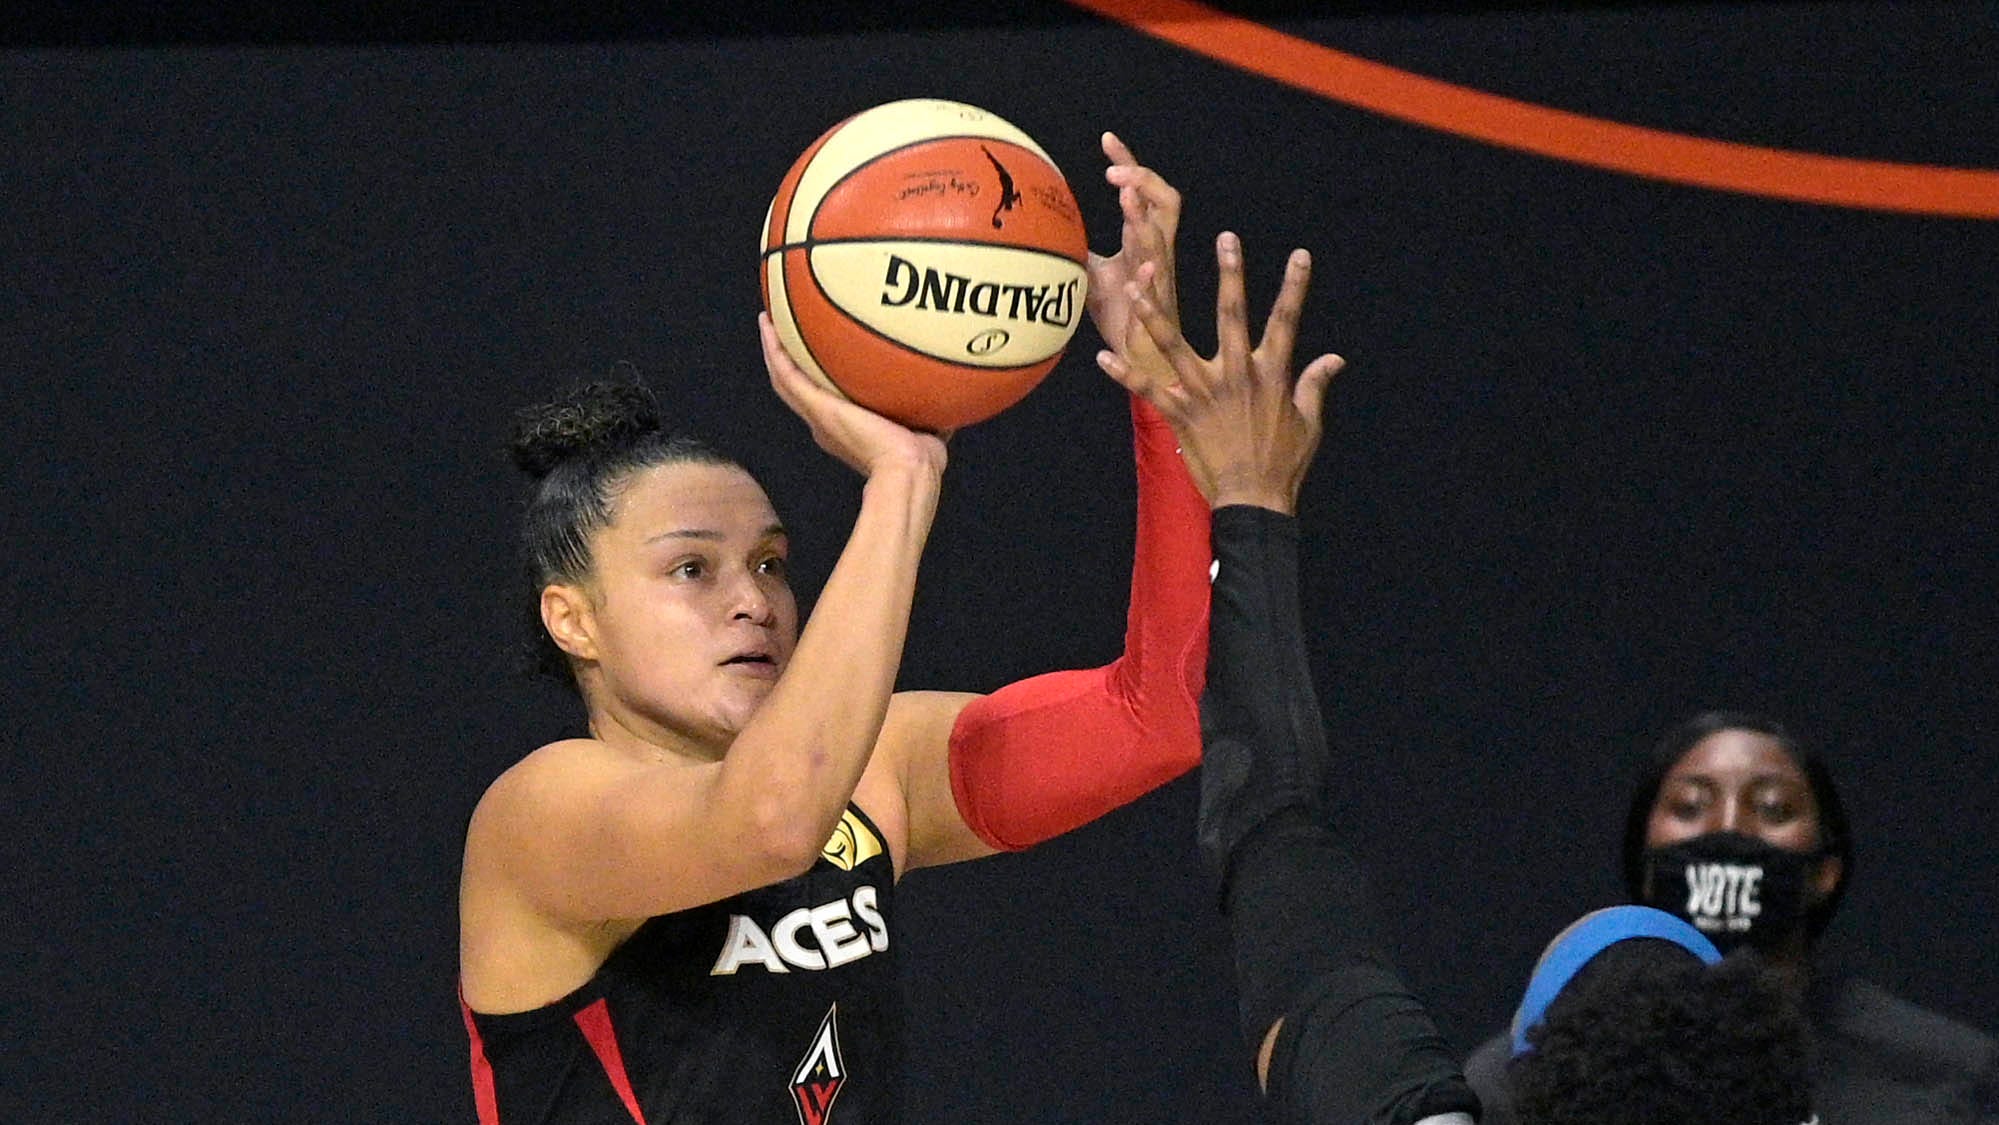 Erie native Kayla McBride makes it official, signs with Lynx